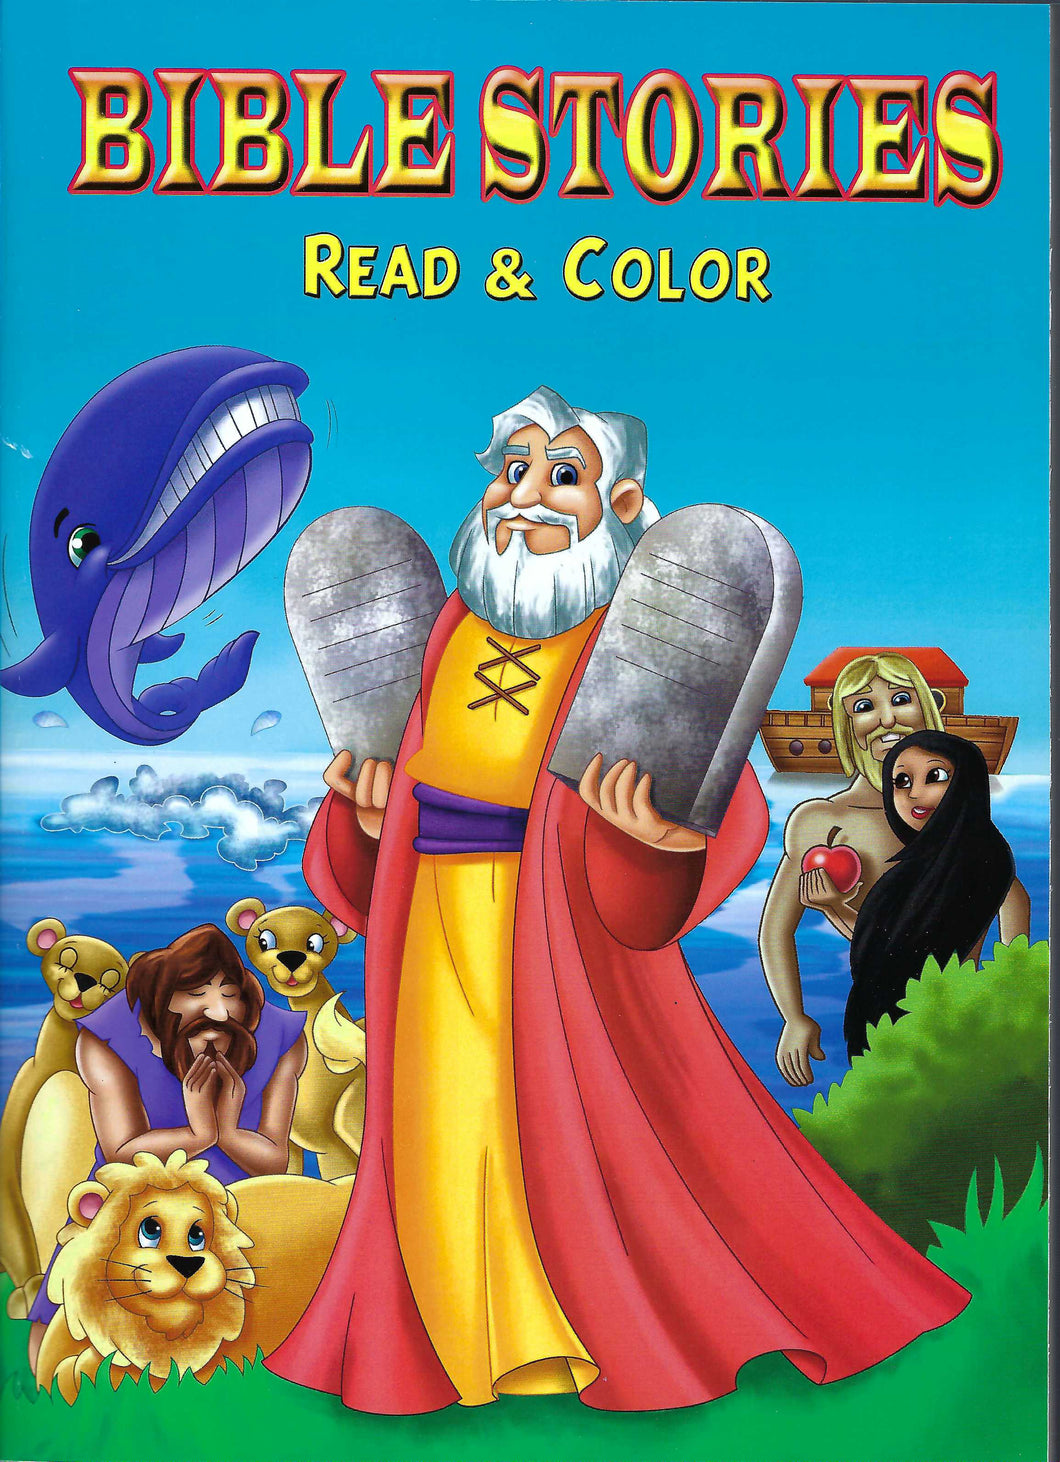 02121-1 - Bible Story - Coloring Books